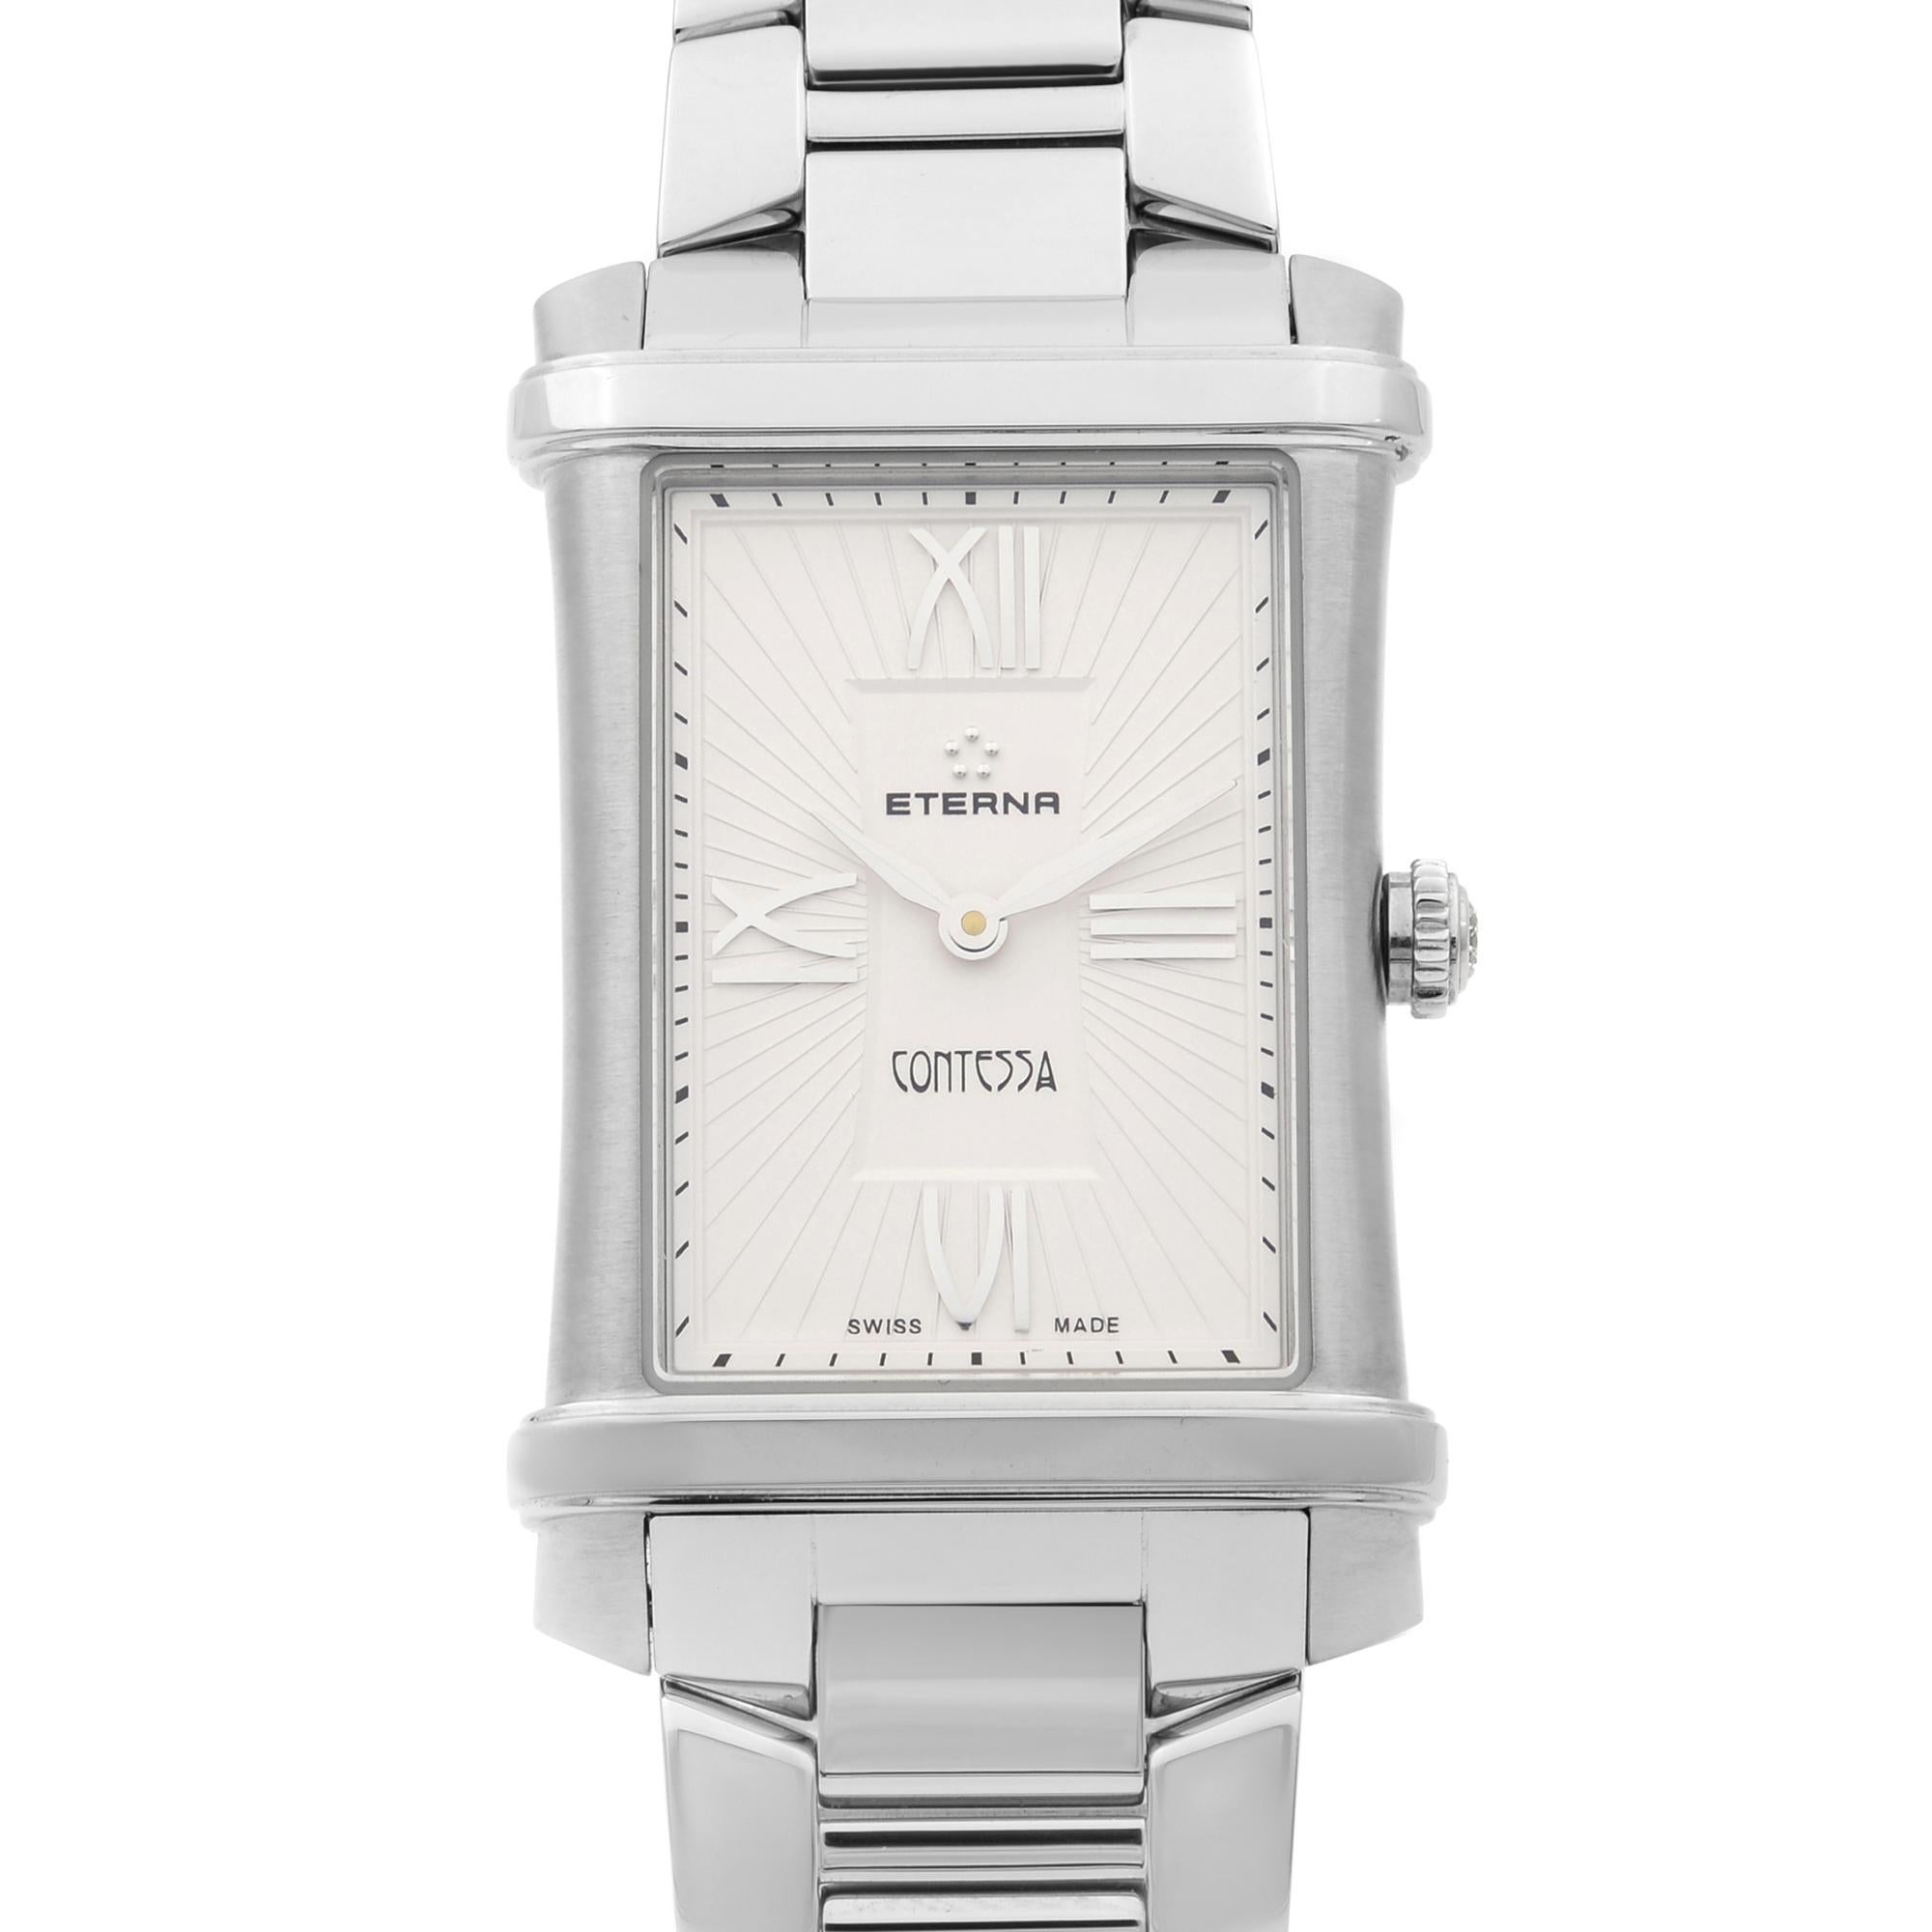 This display model Eterna Contessa  2410.41.65.0264 is a beautiful Ladie's timepiece that is powered by quartz (battery) movement which is cased in a stainless steel case. It has a  rectangle shape face, no features dial and has hand roman numerals